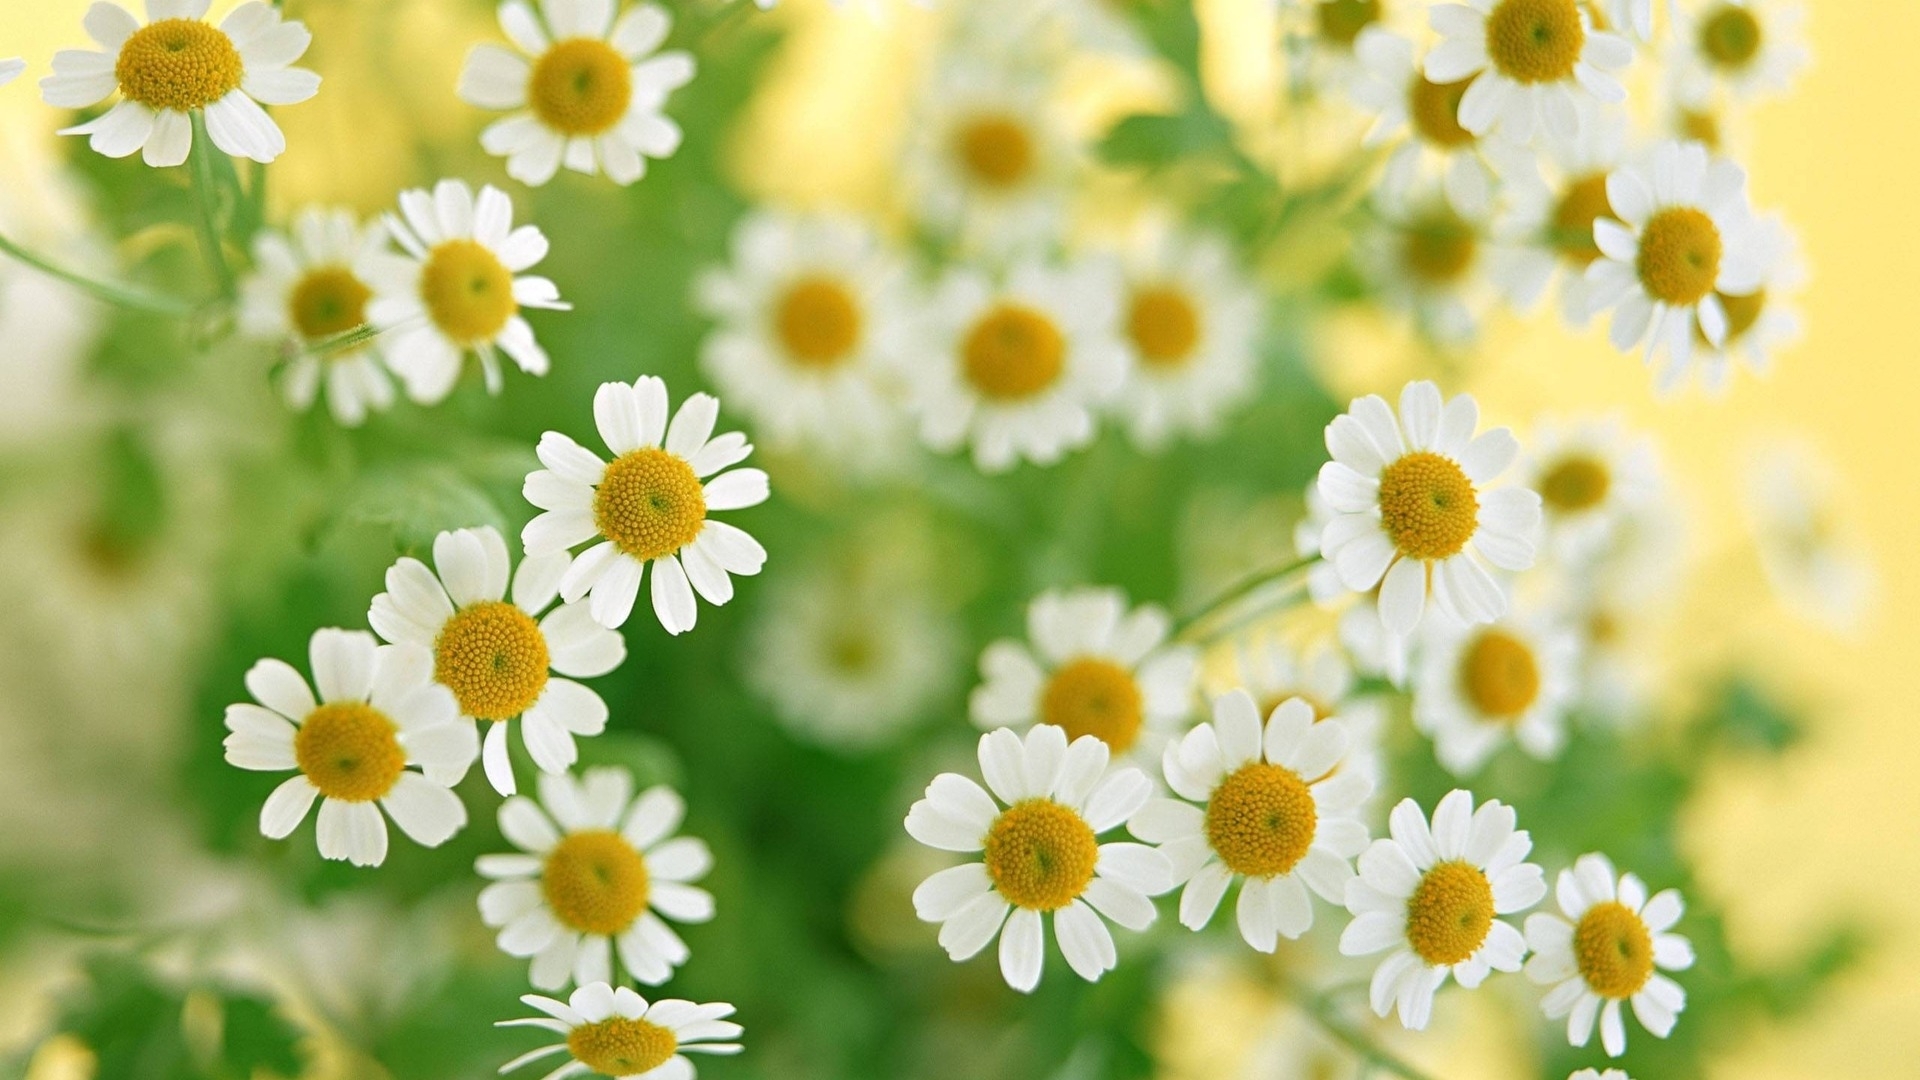 Windows Backgrounds plants, flowers, camomile, green